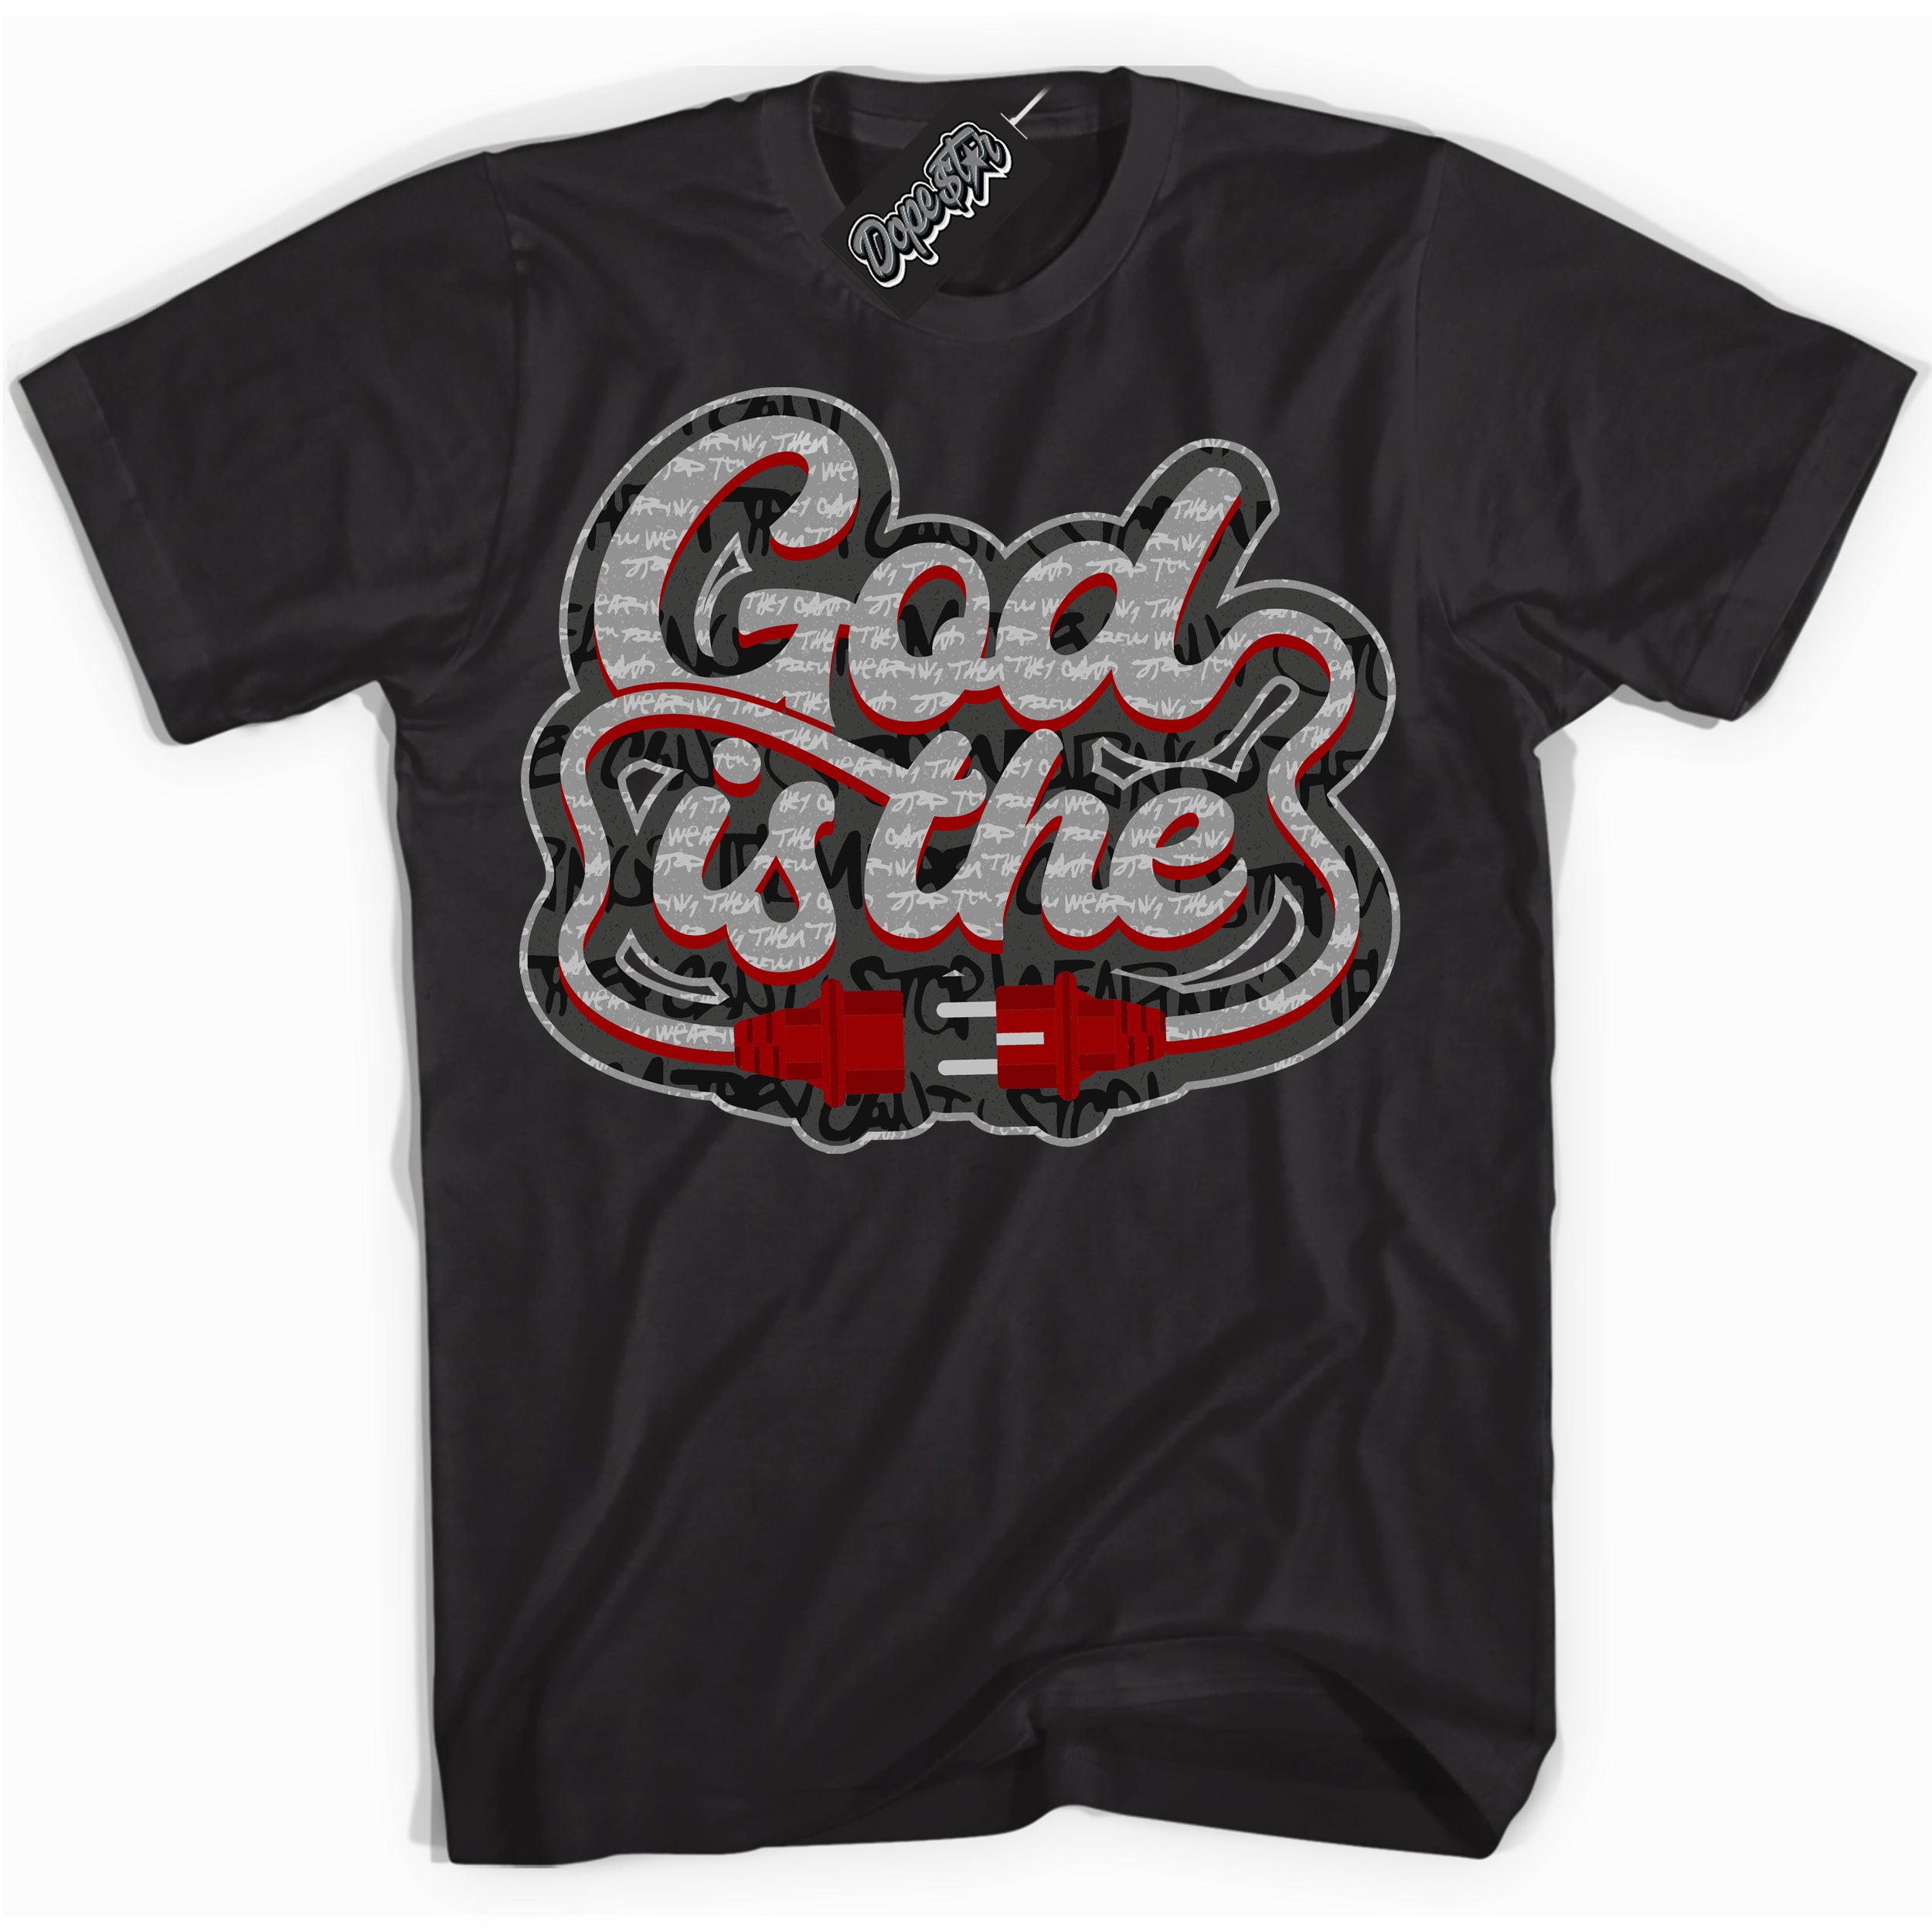 Cool Black Shirt with “ God Is The ” design that perfectly matches Rebellionaire 1s Sneakers.